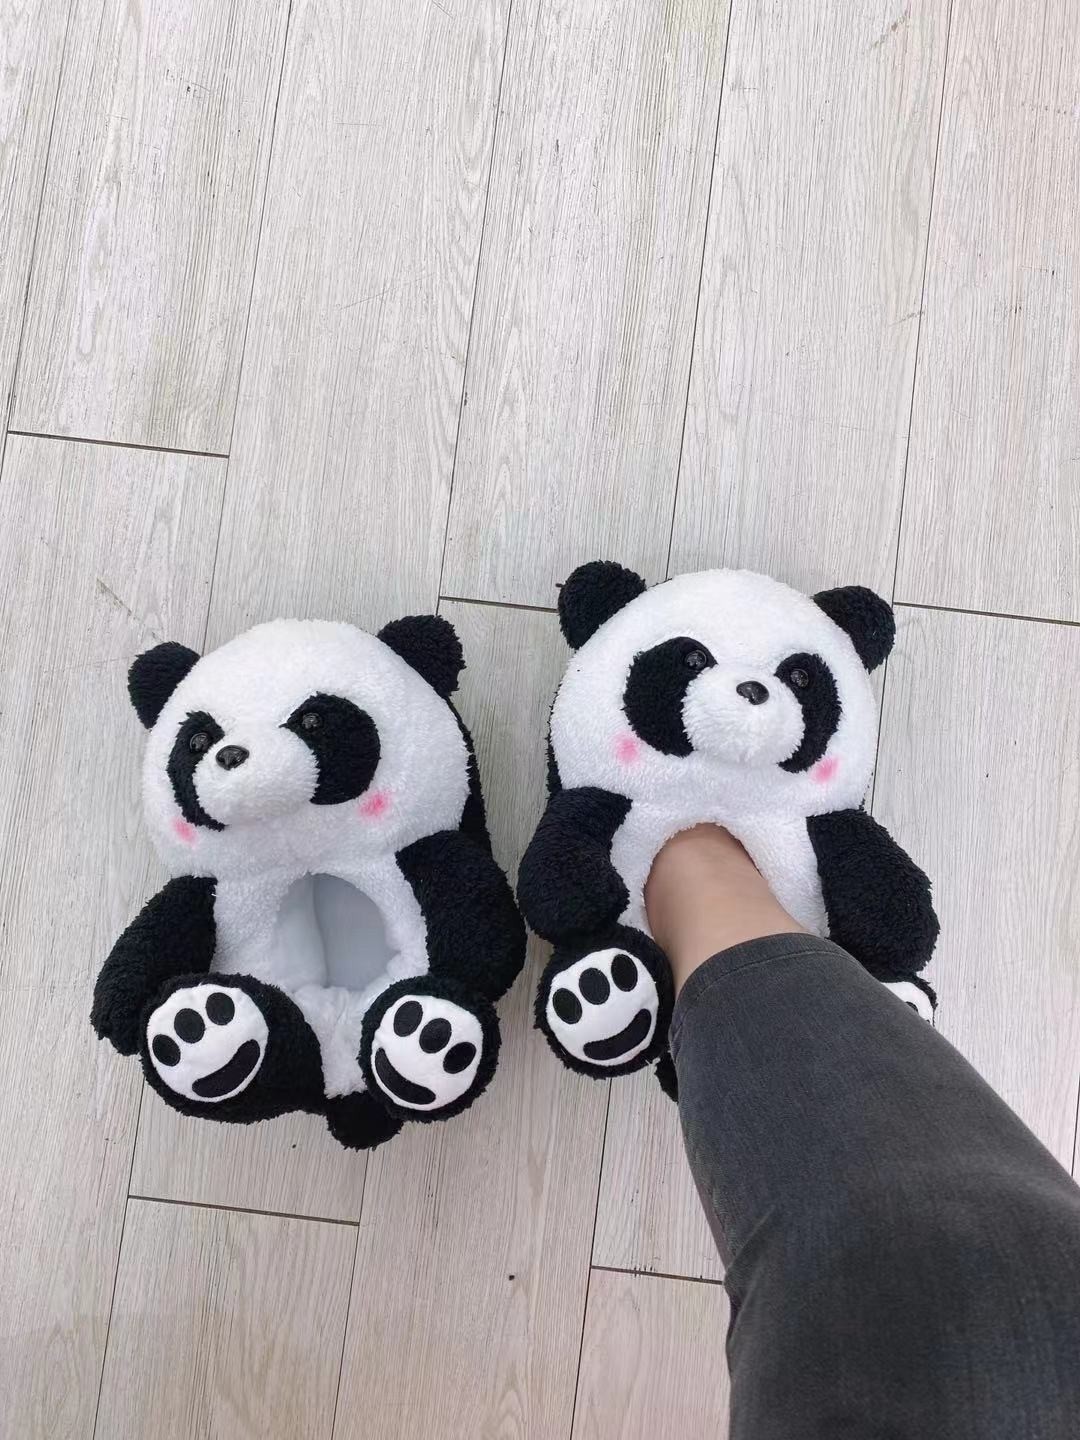 Panda Plush Stuffed Indoor Leisure Slippers Shoes For Adult